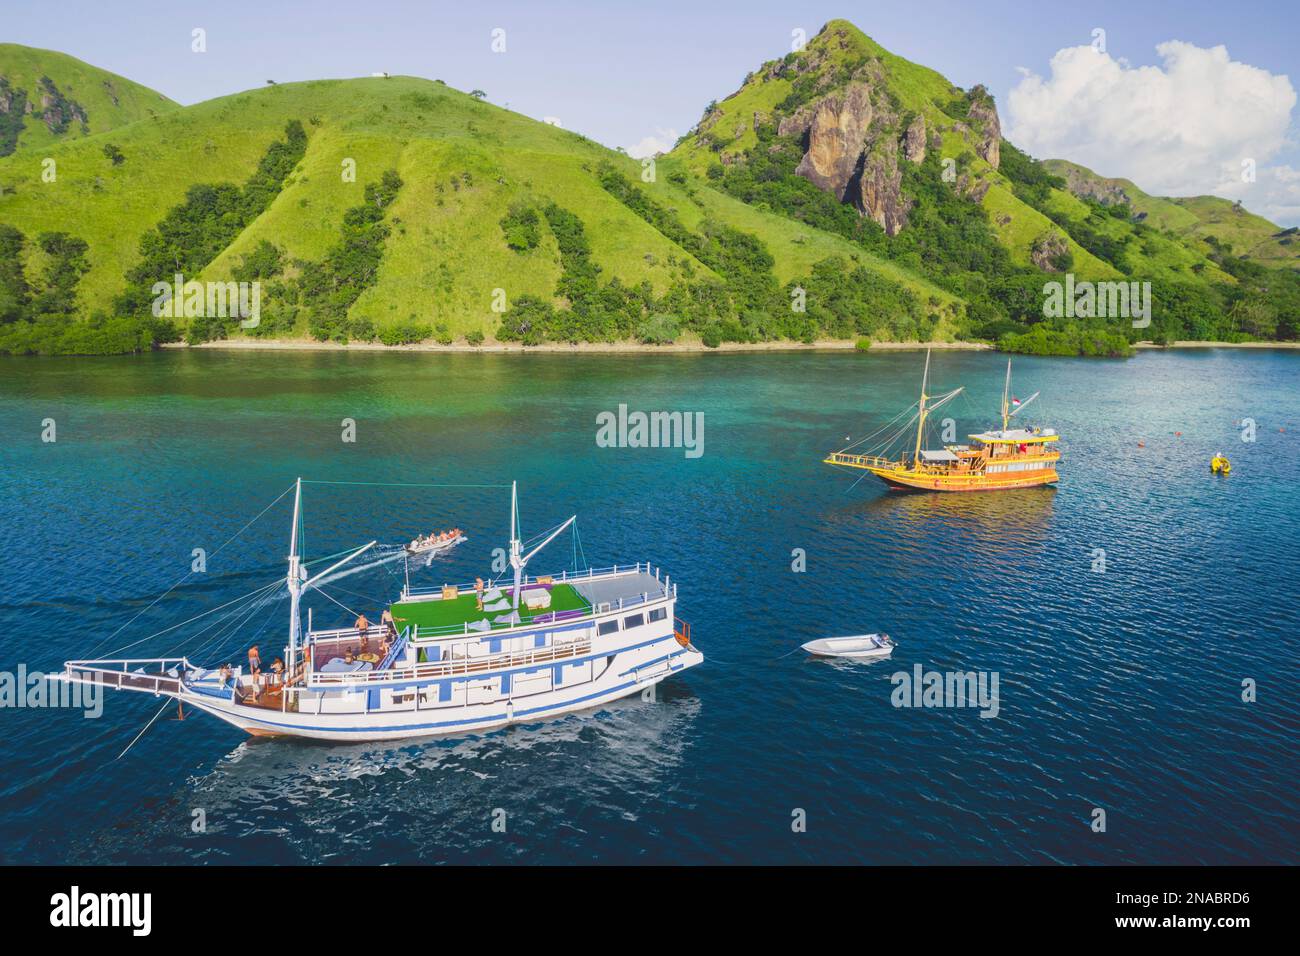 Boats in the tranquil waters along the lush and rugged coastline of Komodo National Park; East Nusa Tenggara, Indonesia Stock Photo